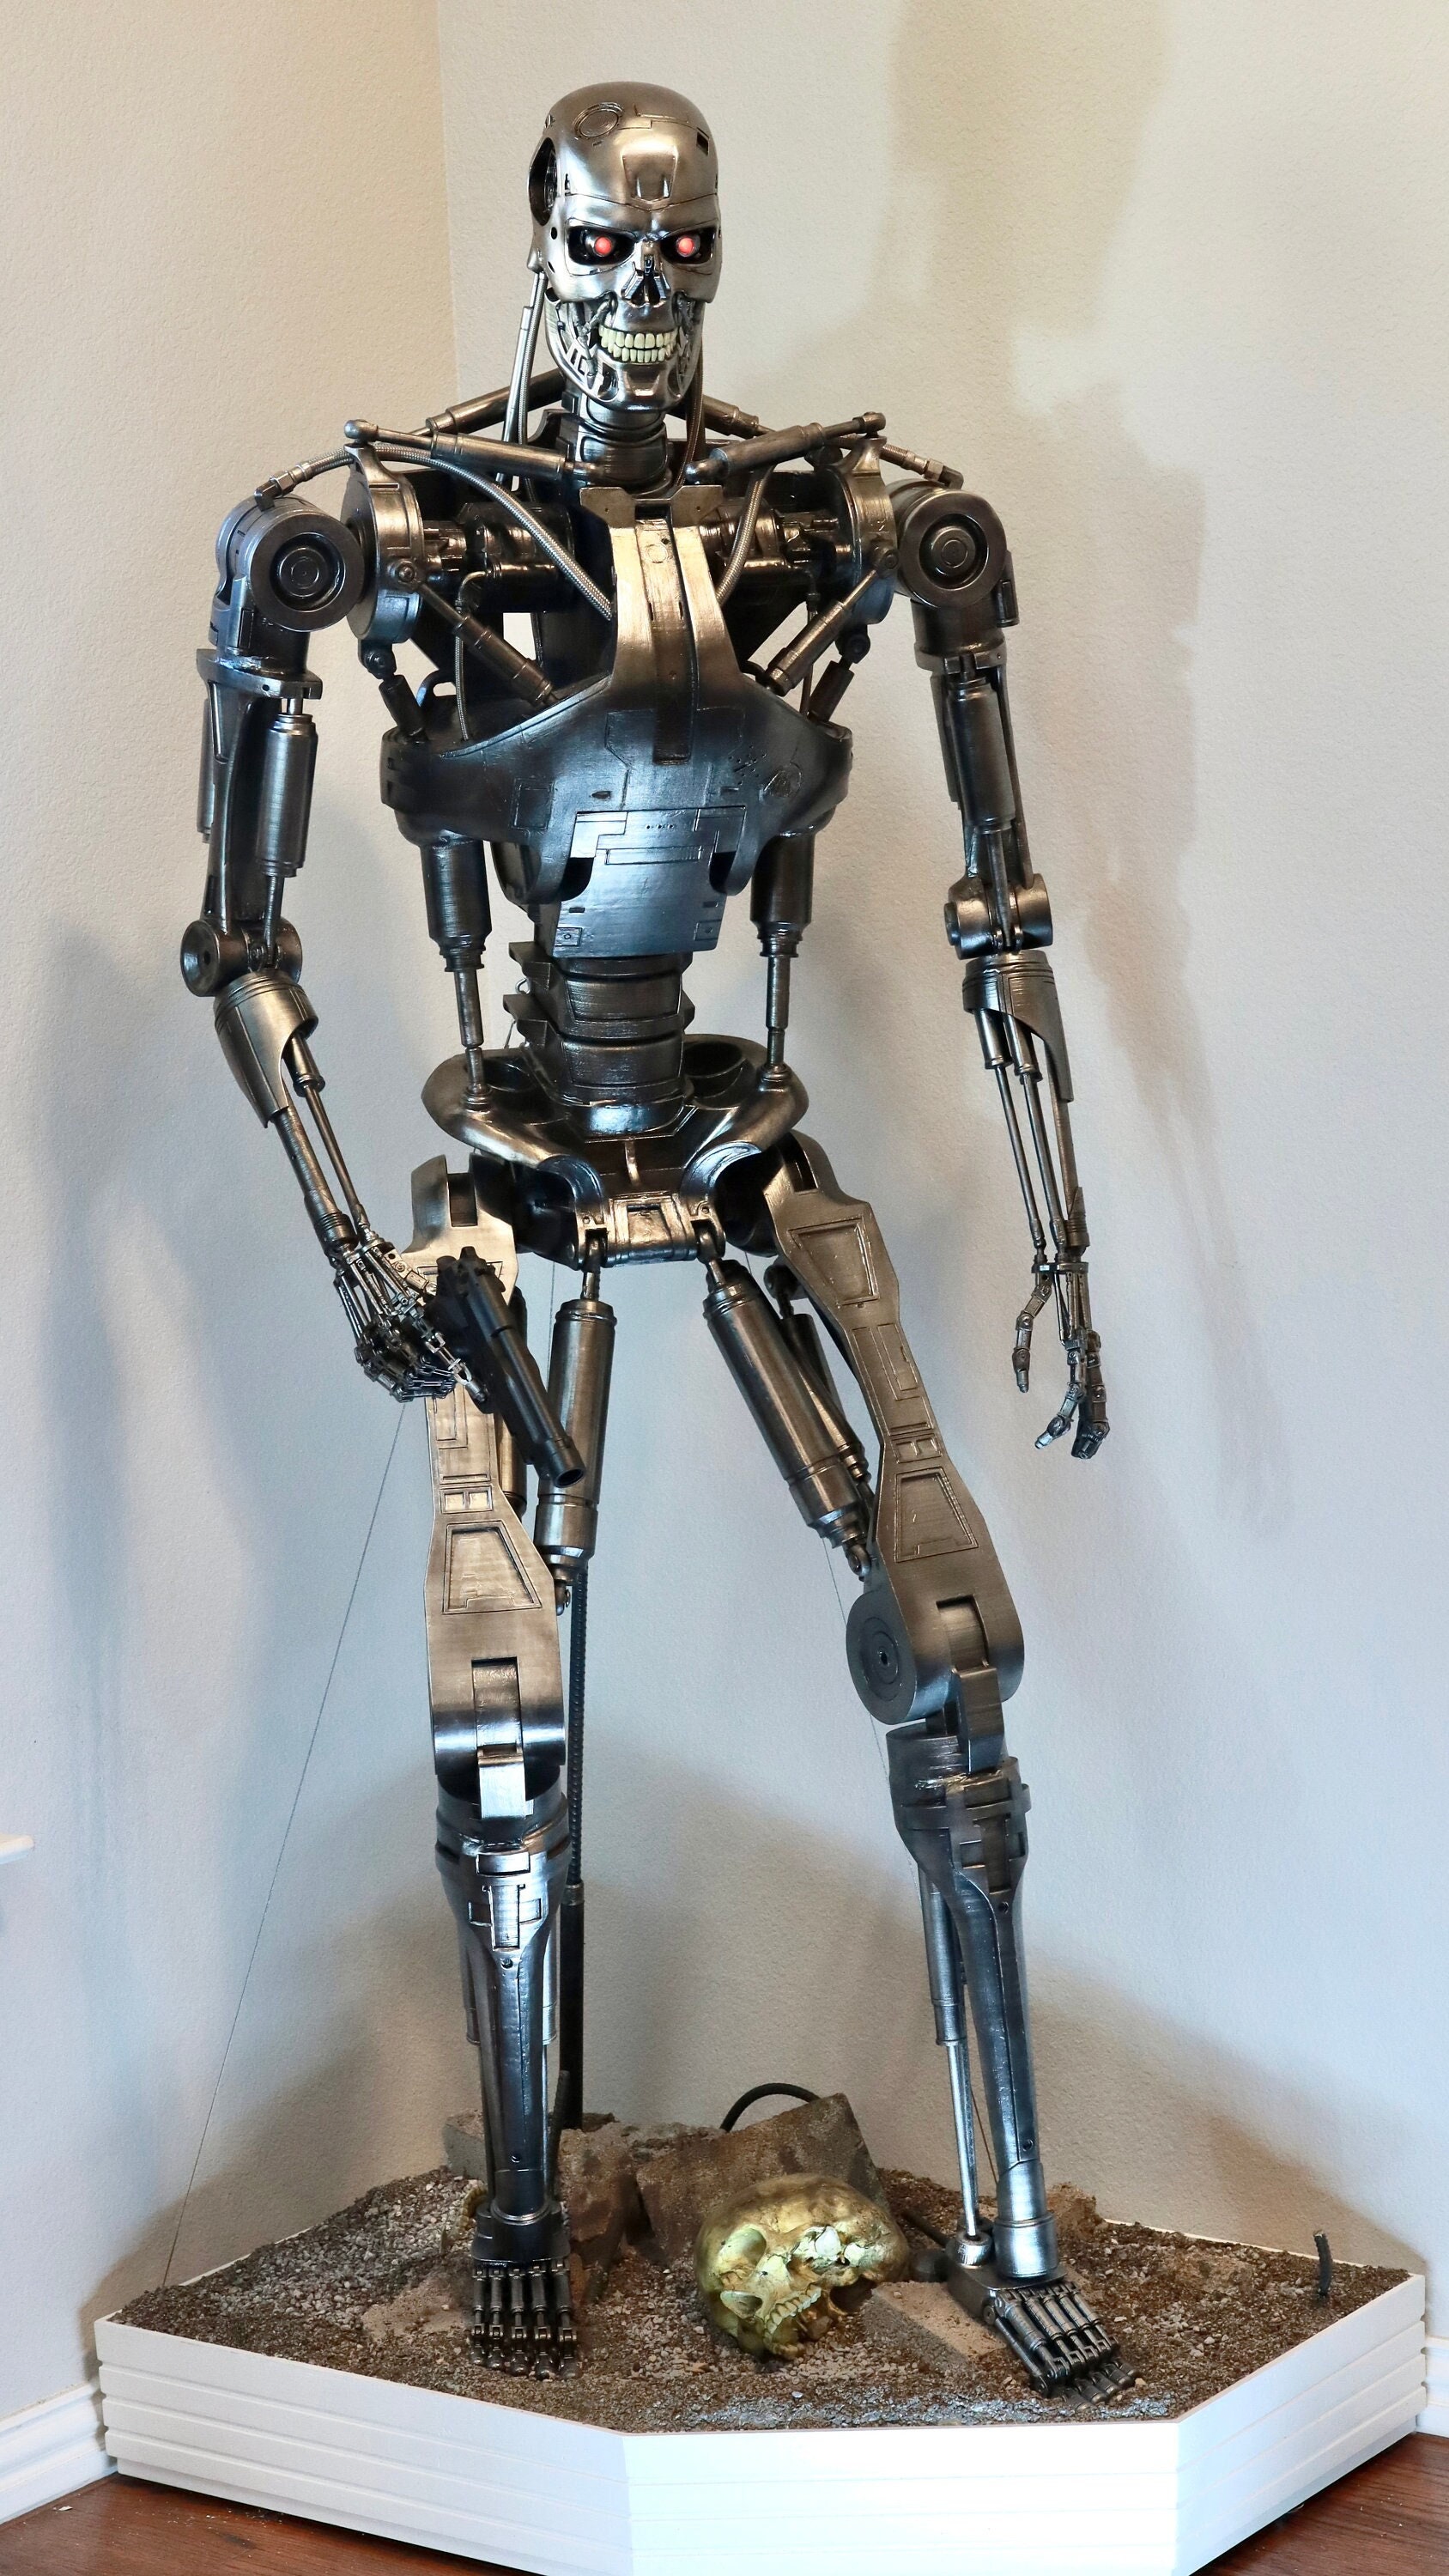 T2 Terminator T800 Endoskeleton 1:1 Lifesize Movable // Replica  Endoskeleton // Bust // Bust // Stand Figure -  Canada